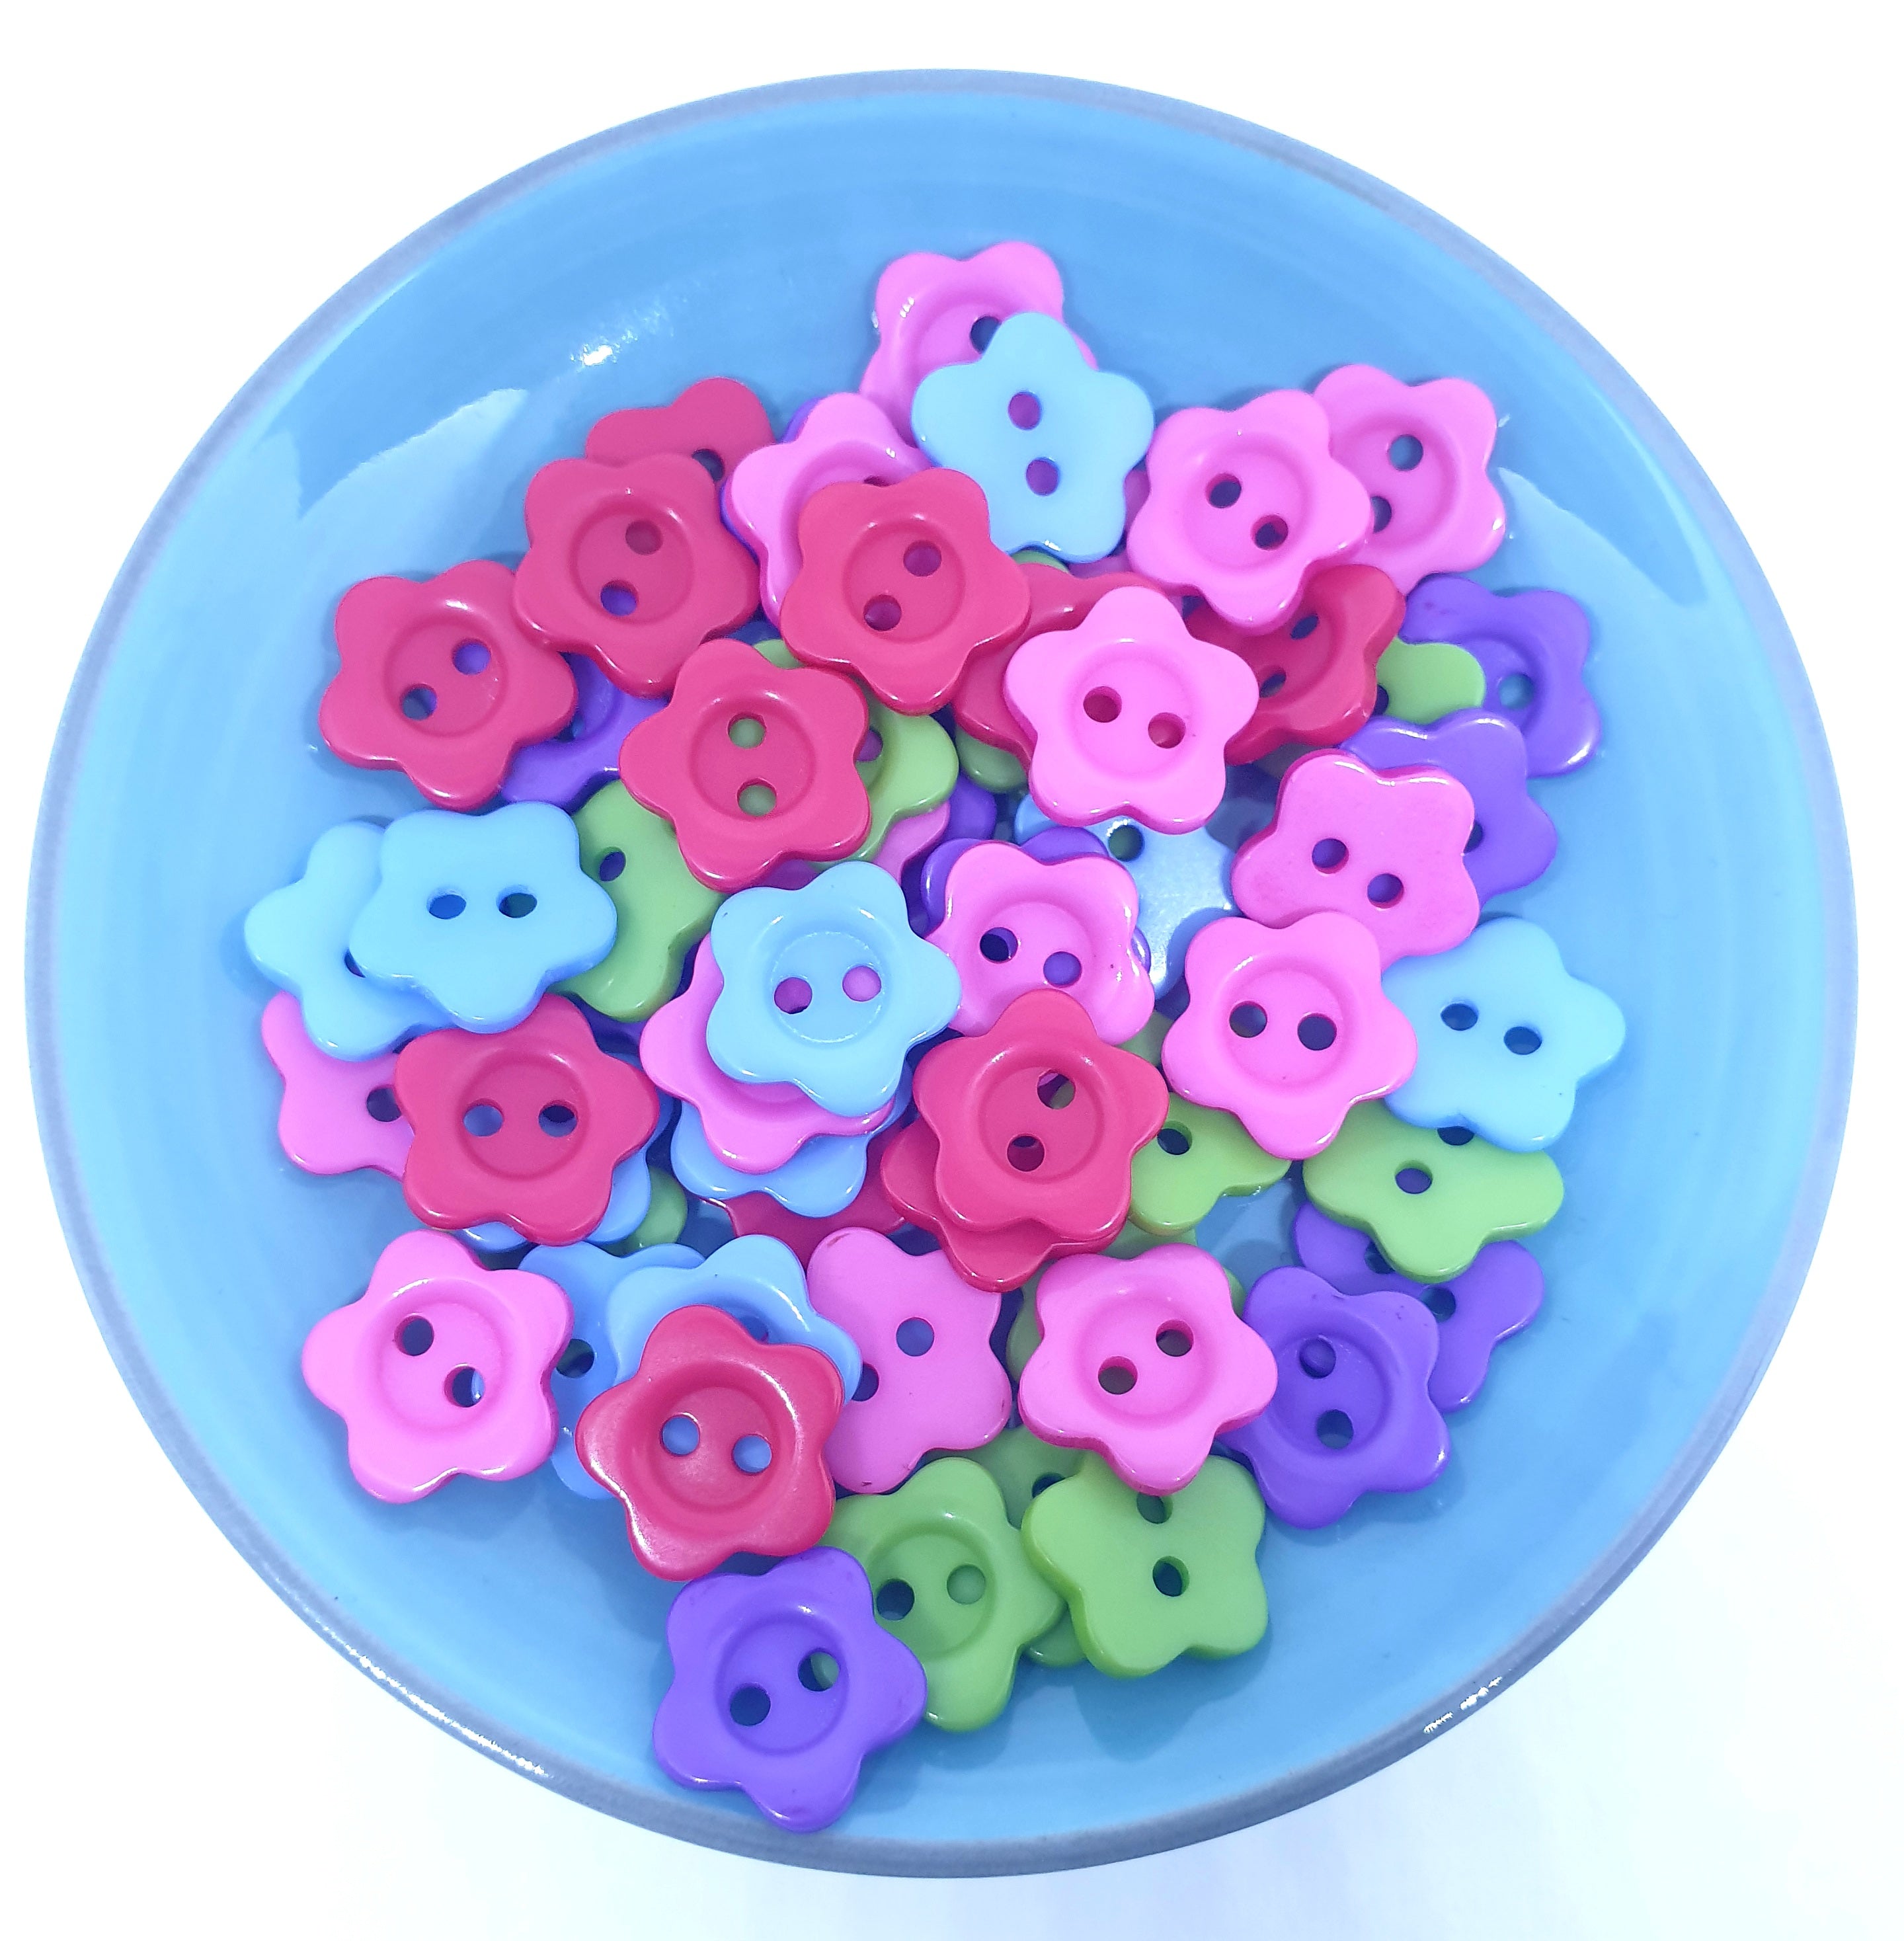 MajorCrafts 48pcs 14mm Mixed Colours Flower Shaped 2 Holes Resin Sewing Buttons